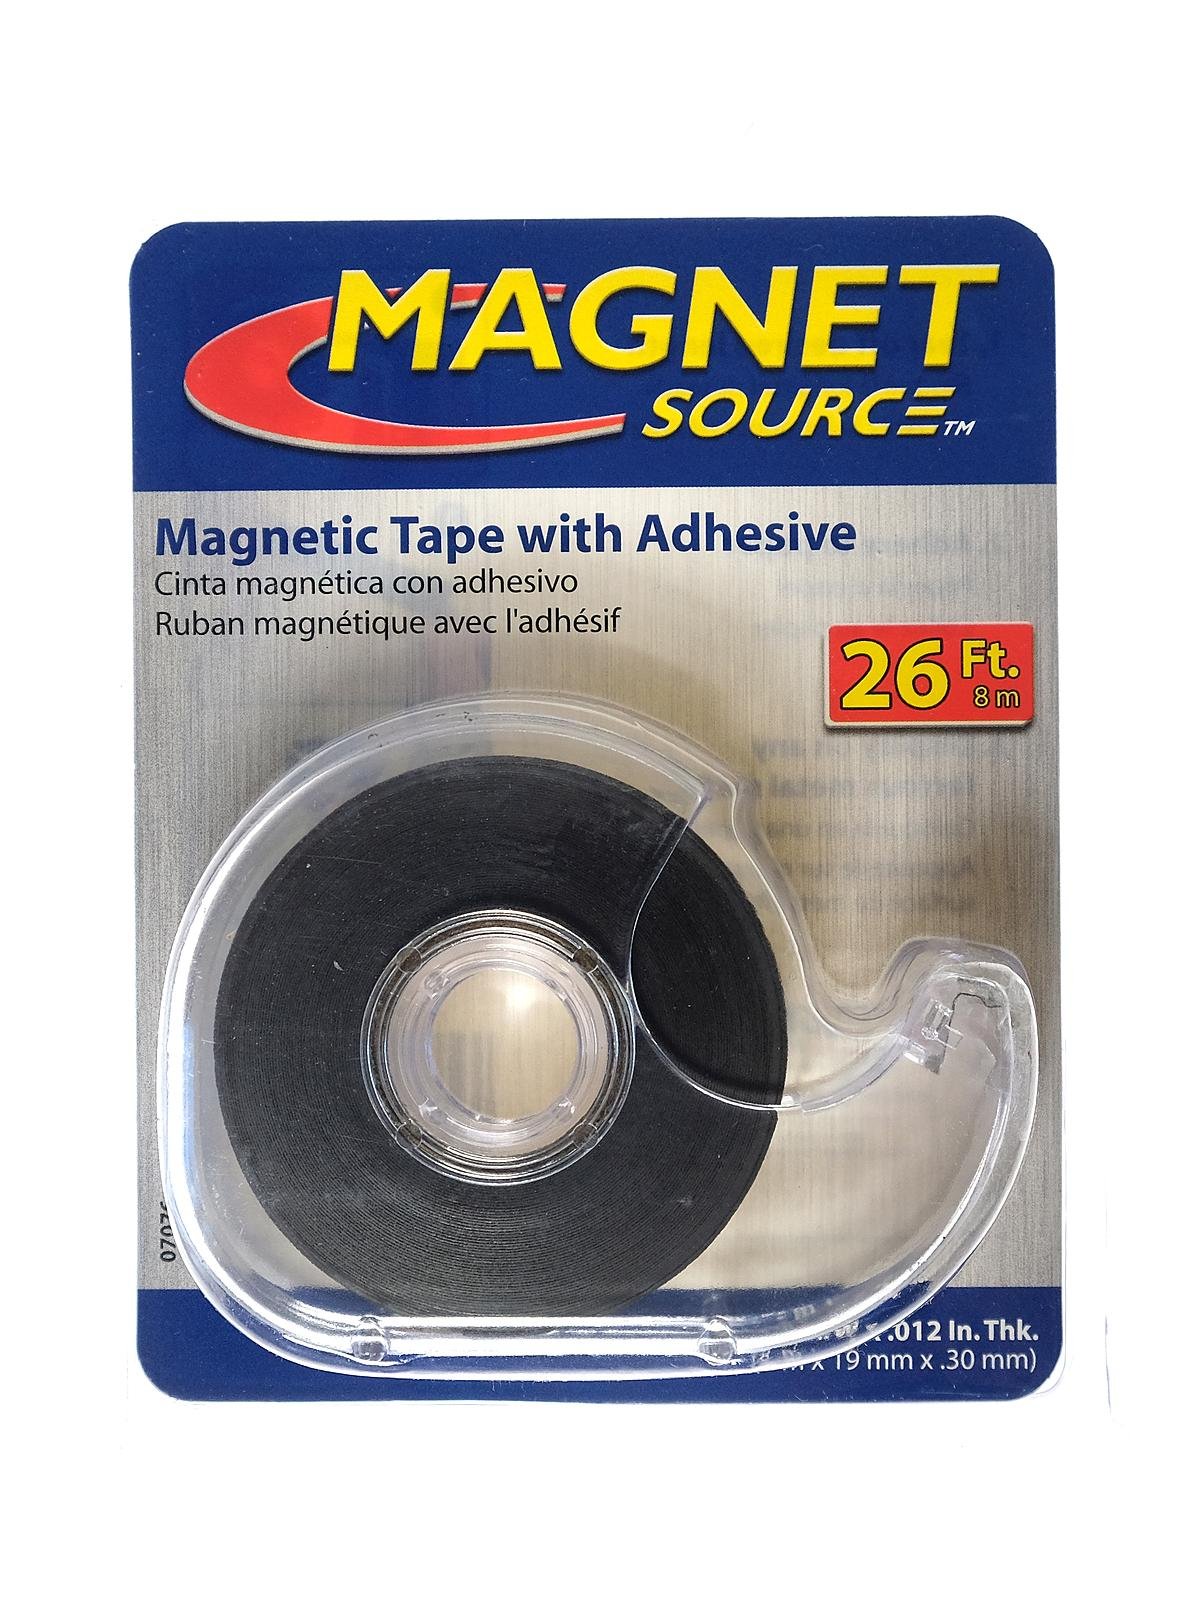 The Magnet Source - Magnet Tape with Dispenser